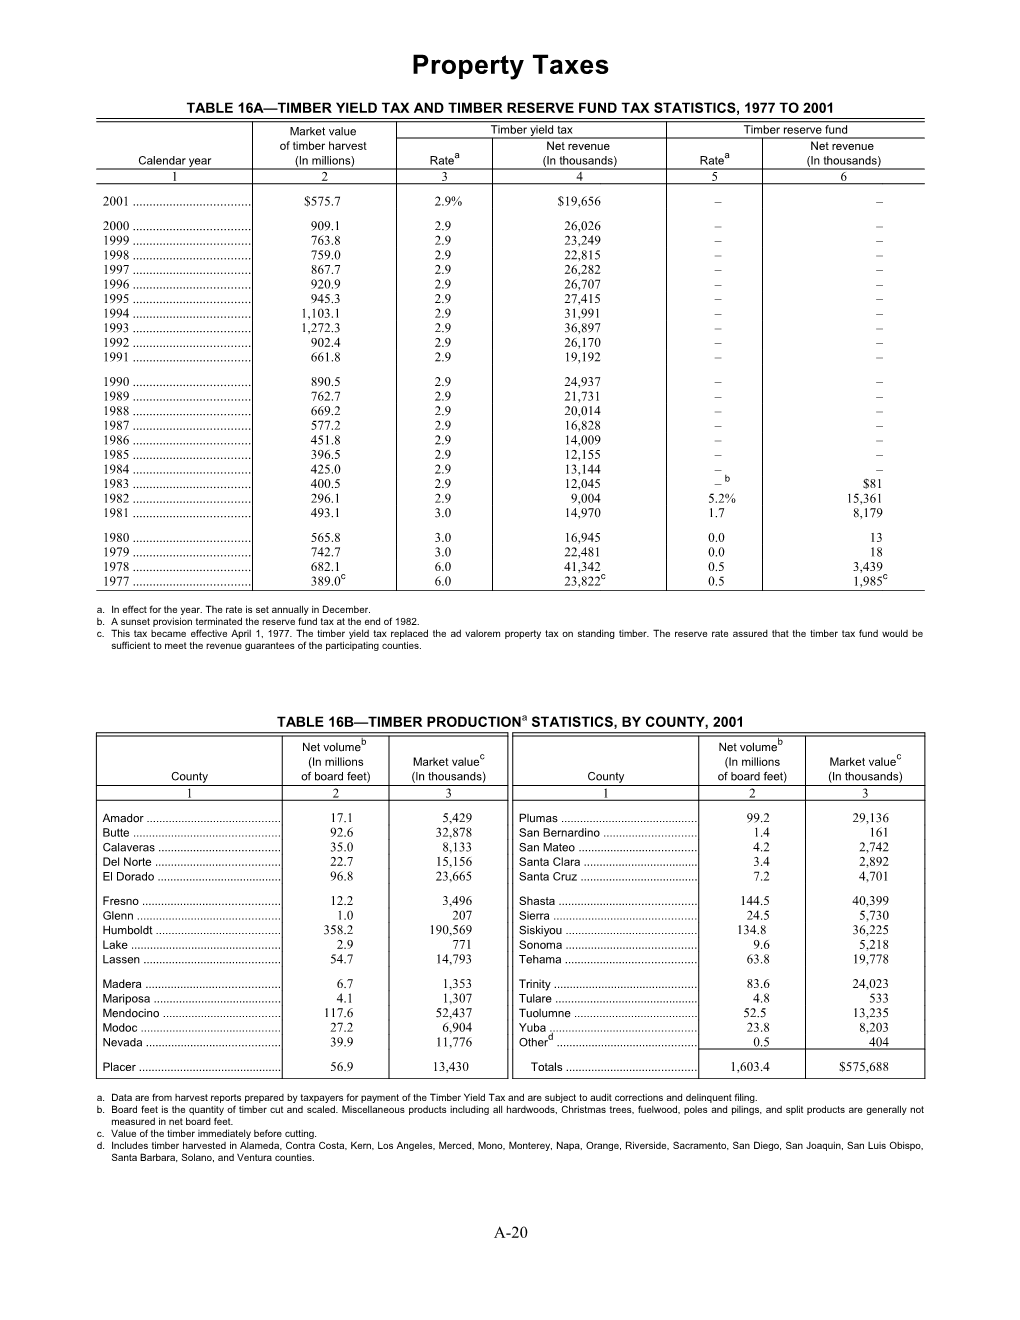 Table 16A Timber Yield Tax and Timber Reserve Fund Tax Statistics, 1977 to 2001